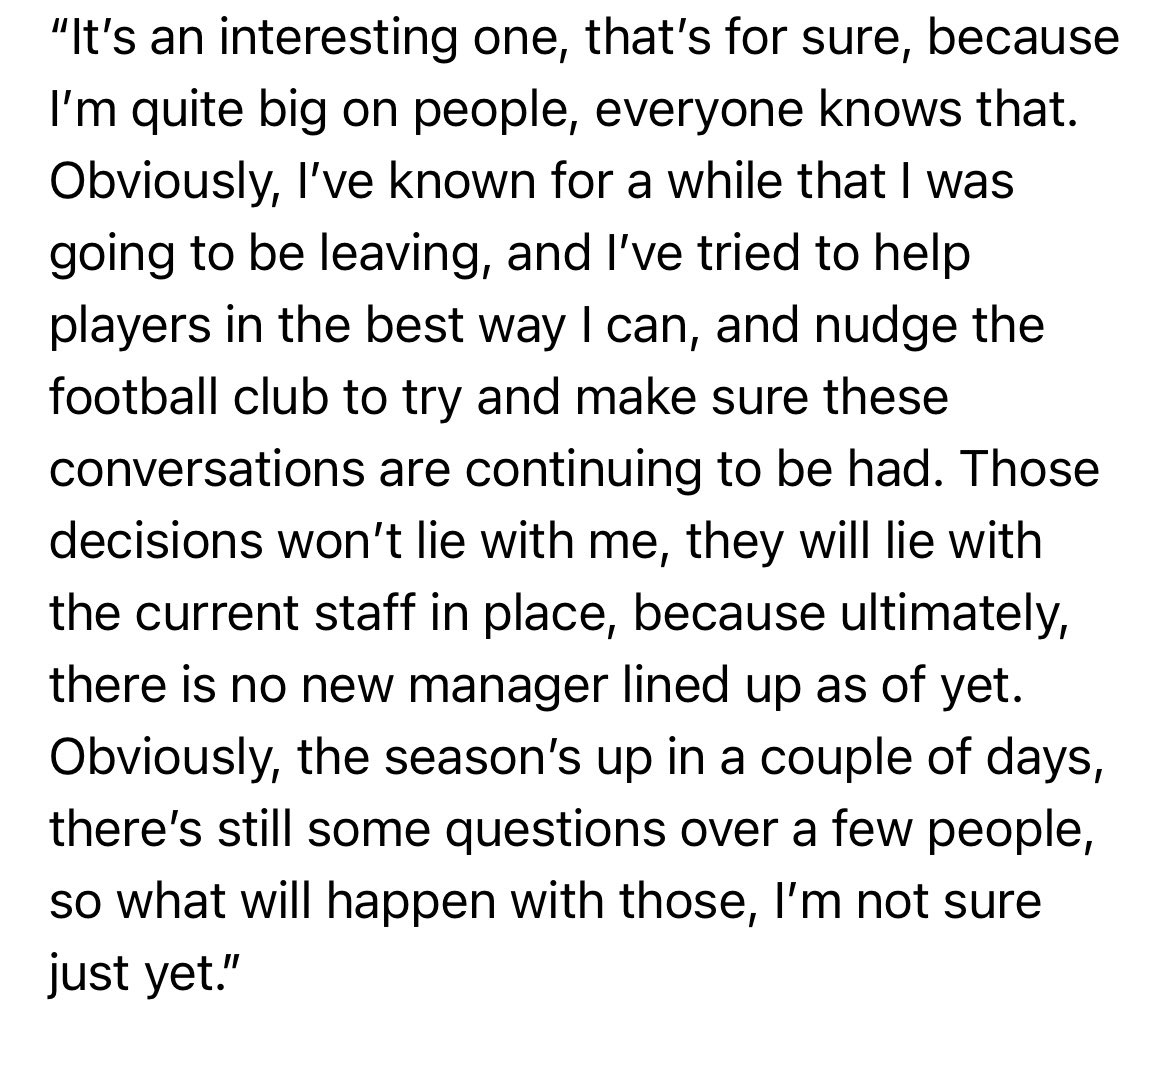 Asked Carla Ward about the process with Aston Villa players’ contract renewals, with one manager leaving and another not yet confirmed. Rachel Corsie confirmed this week as signing a new deal. #avwfc #BarclaysWSL